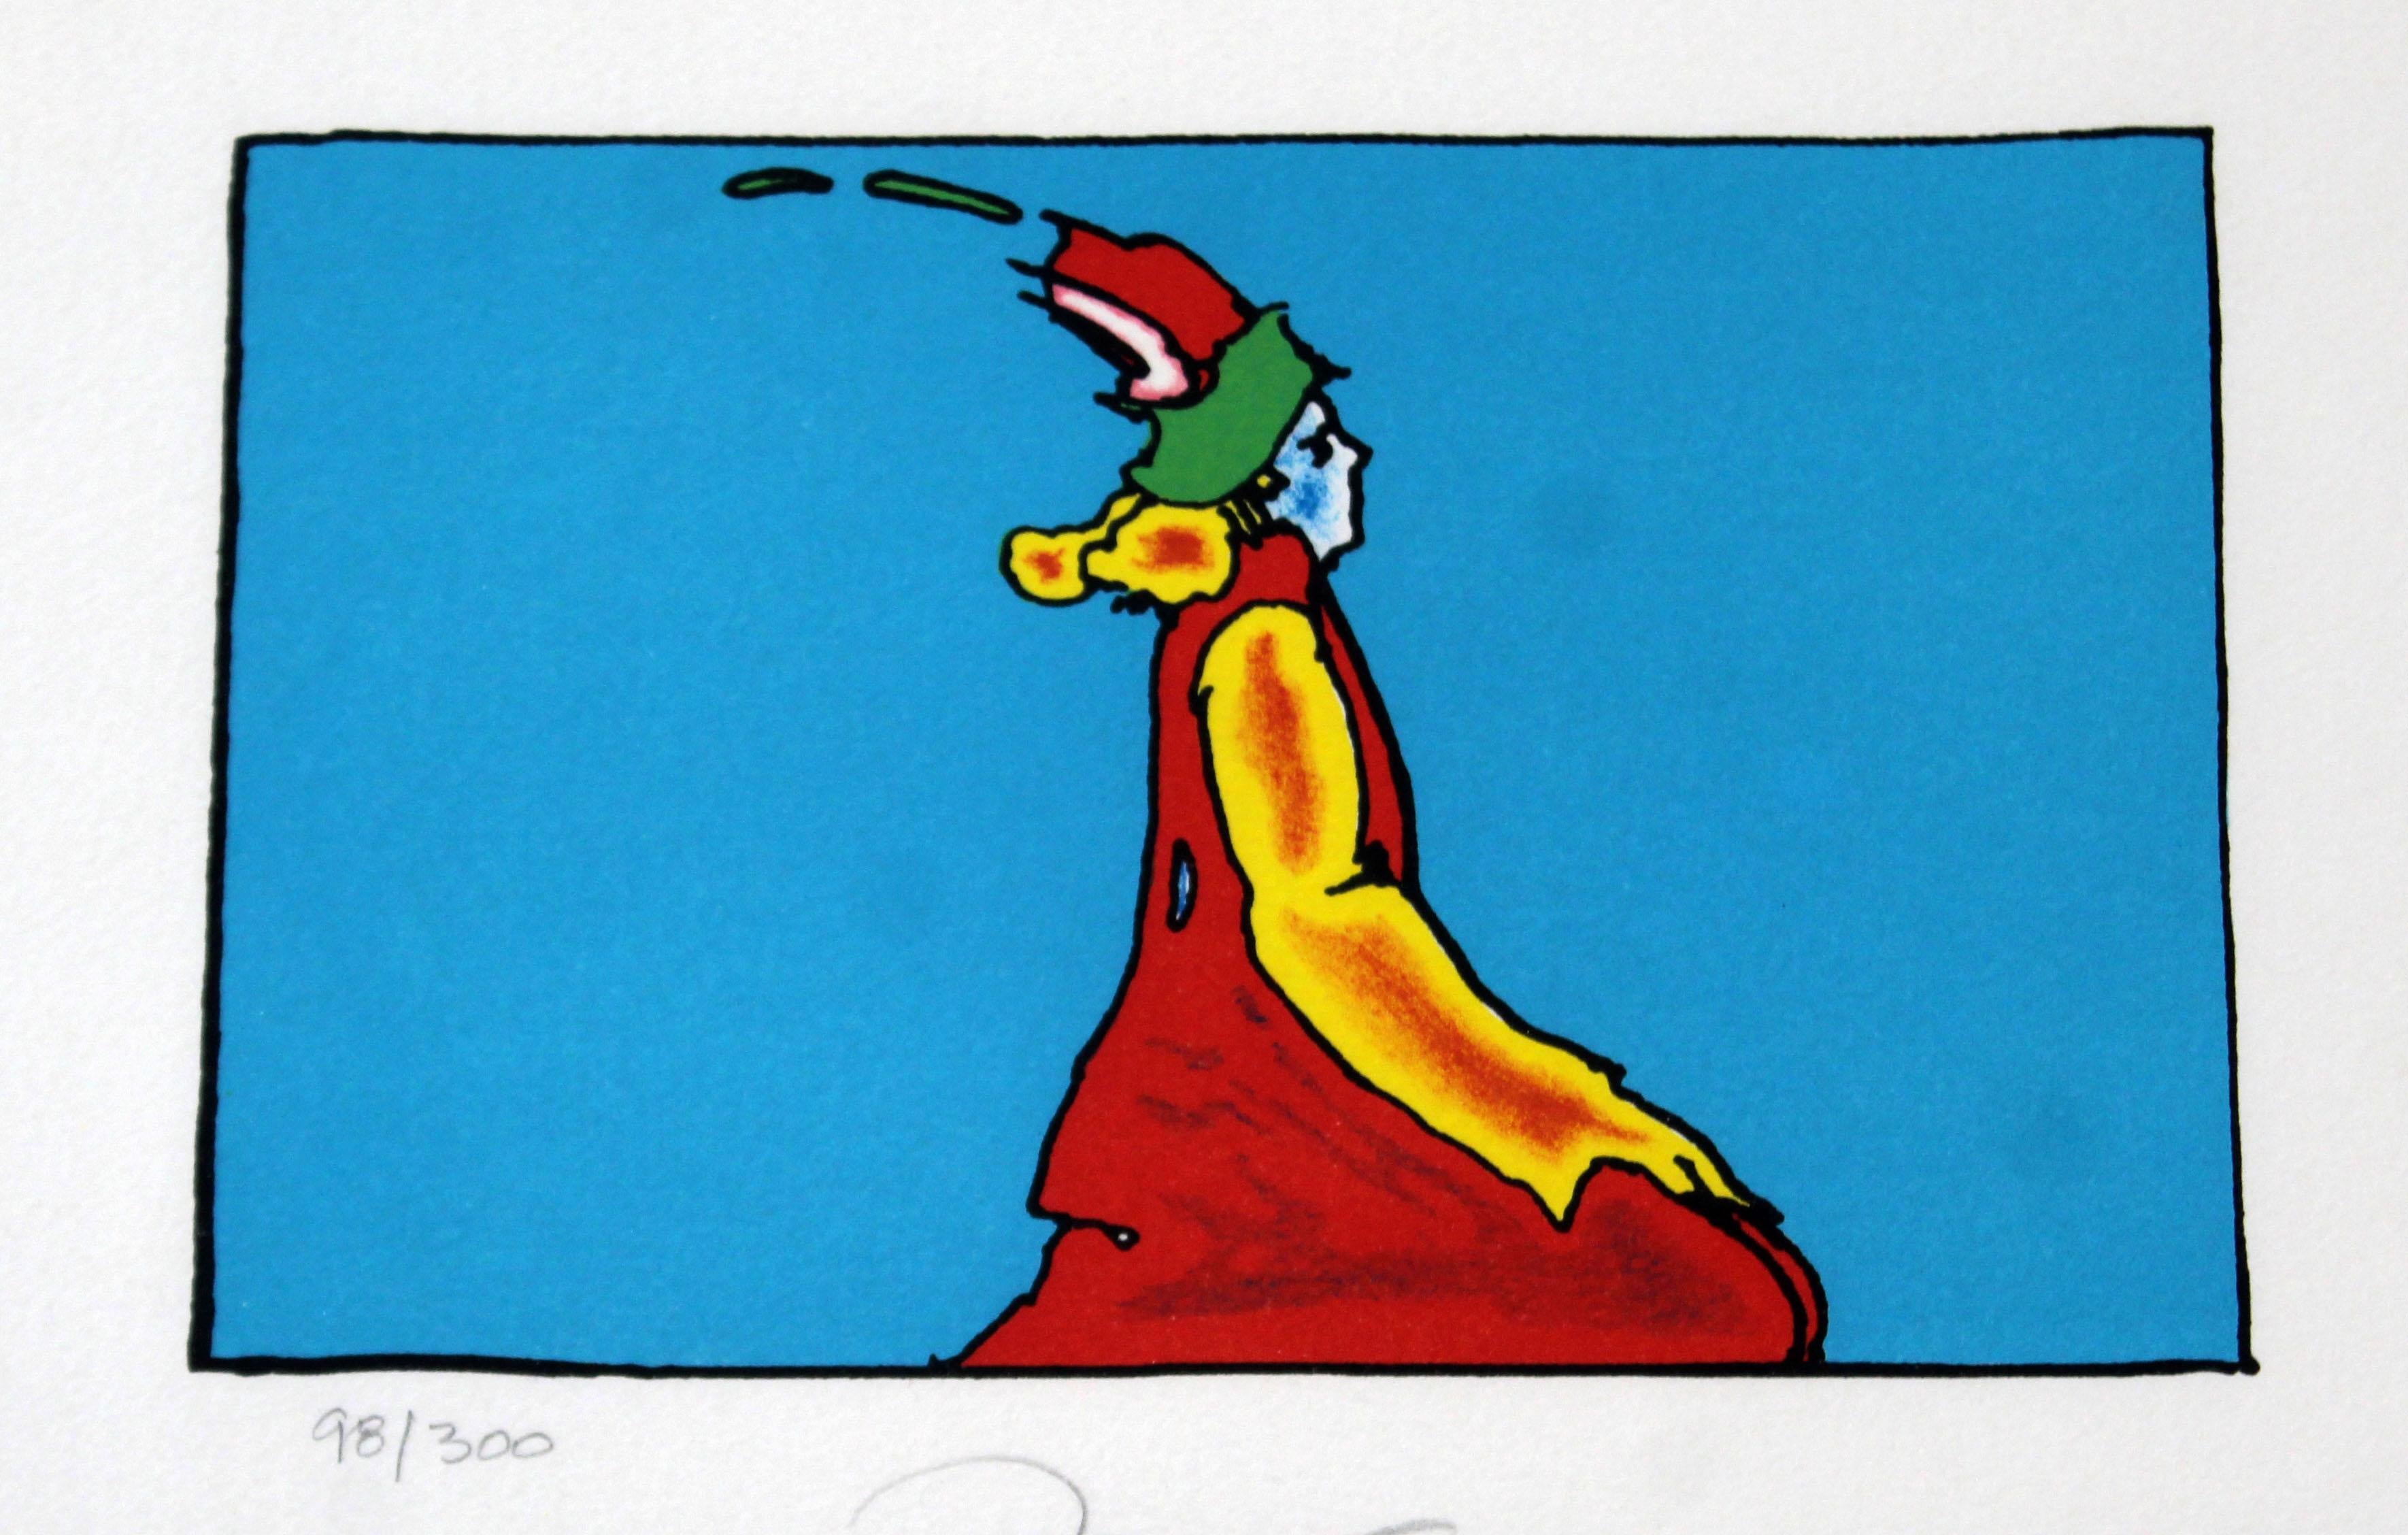 For your consideration is a magnificent, framed lithograph, of a red figure against a blue background; signed, stamped and numbered by Peter Max, 98/300. In excellent condition. The dimensions of the frame are 23